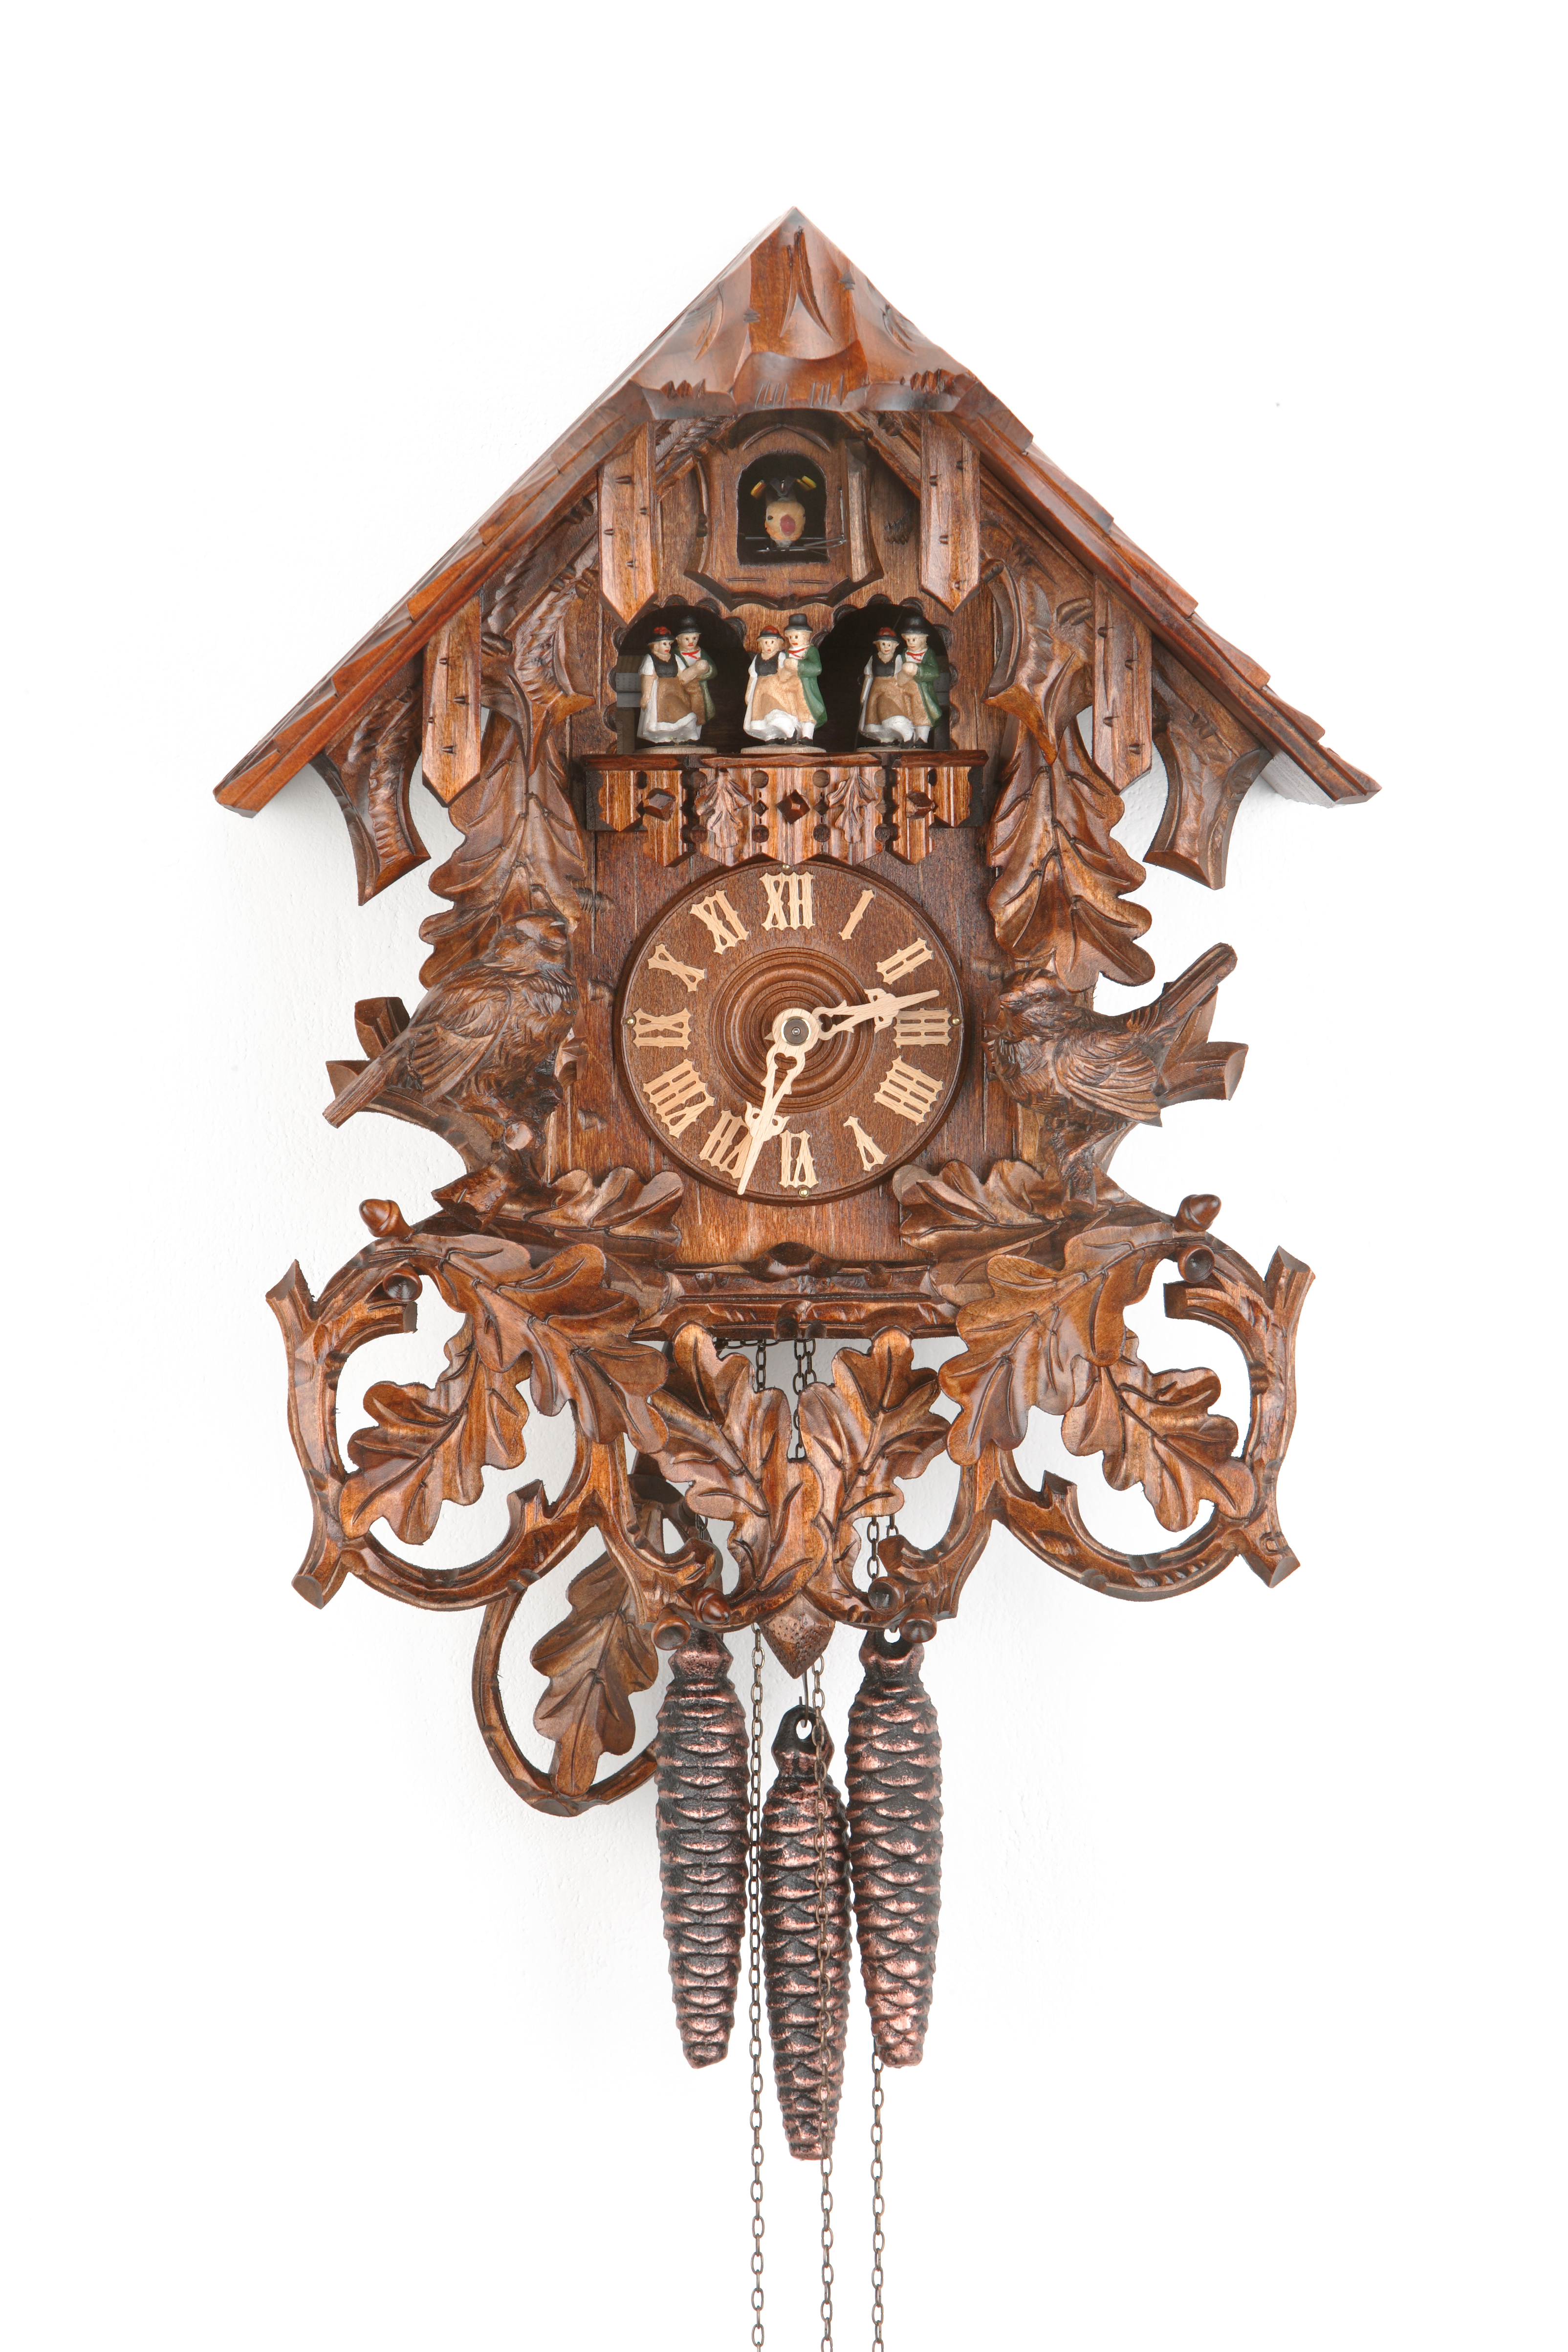 1 Day Music Dancer Cuckoo Clock Black Forest House with sparrows